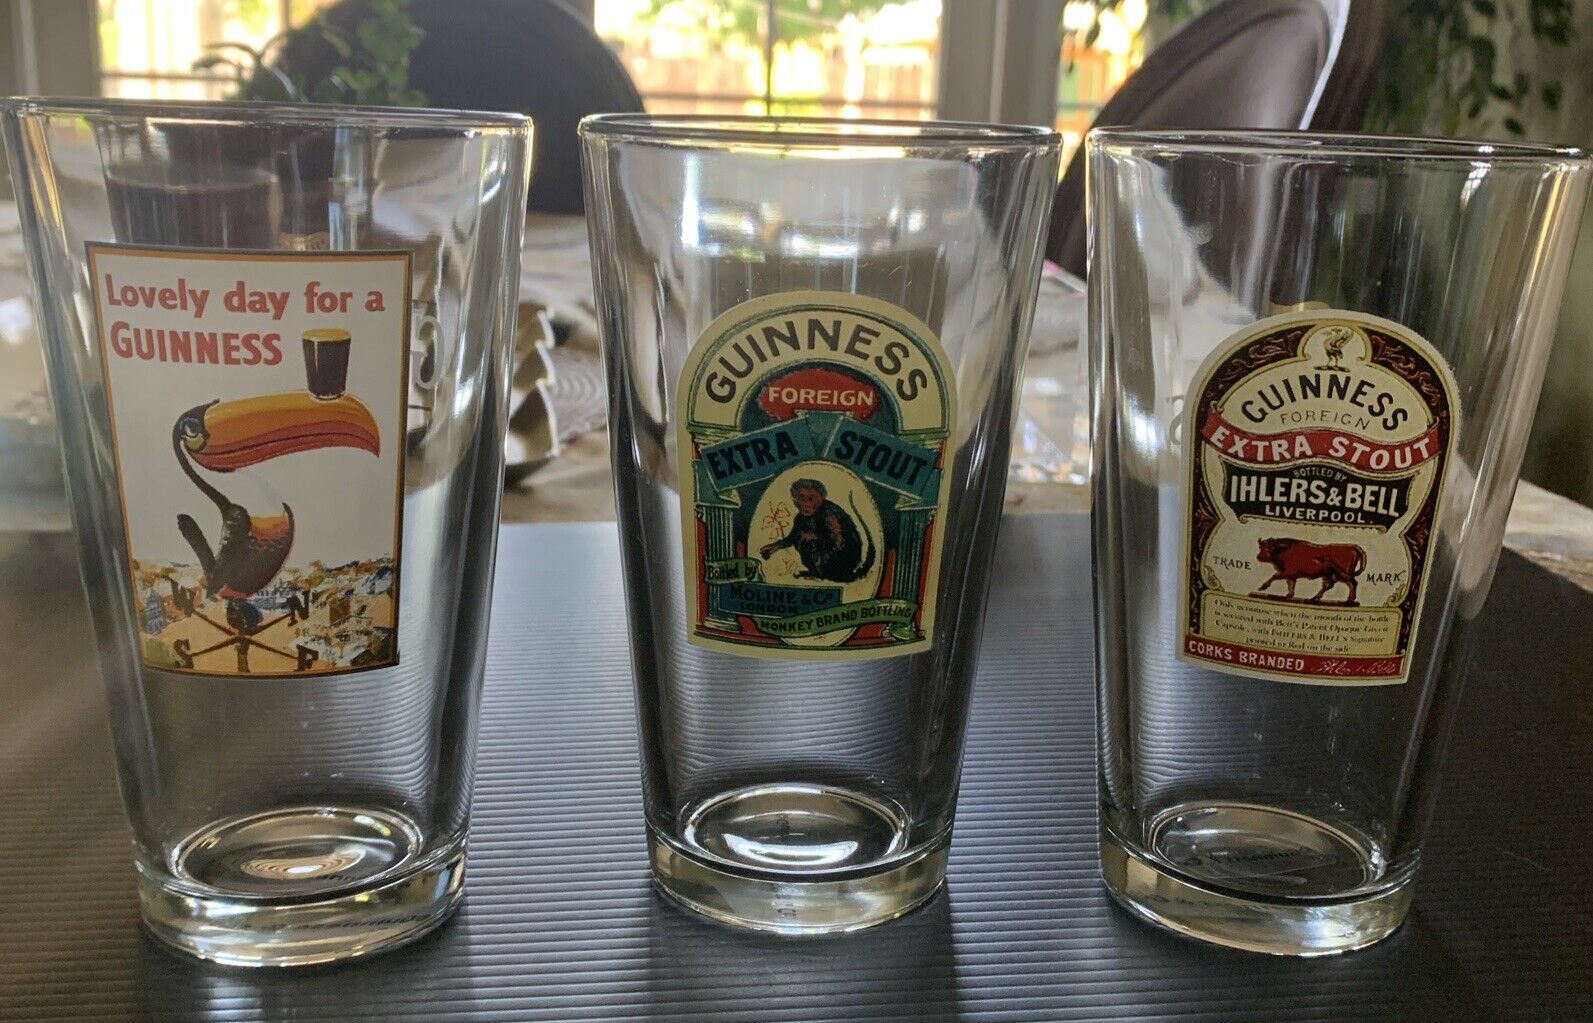 3- Guinness Pint Beer Glass Ihlers & Bell,  Guinness Foreign Extra Stout Monkey